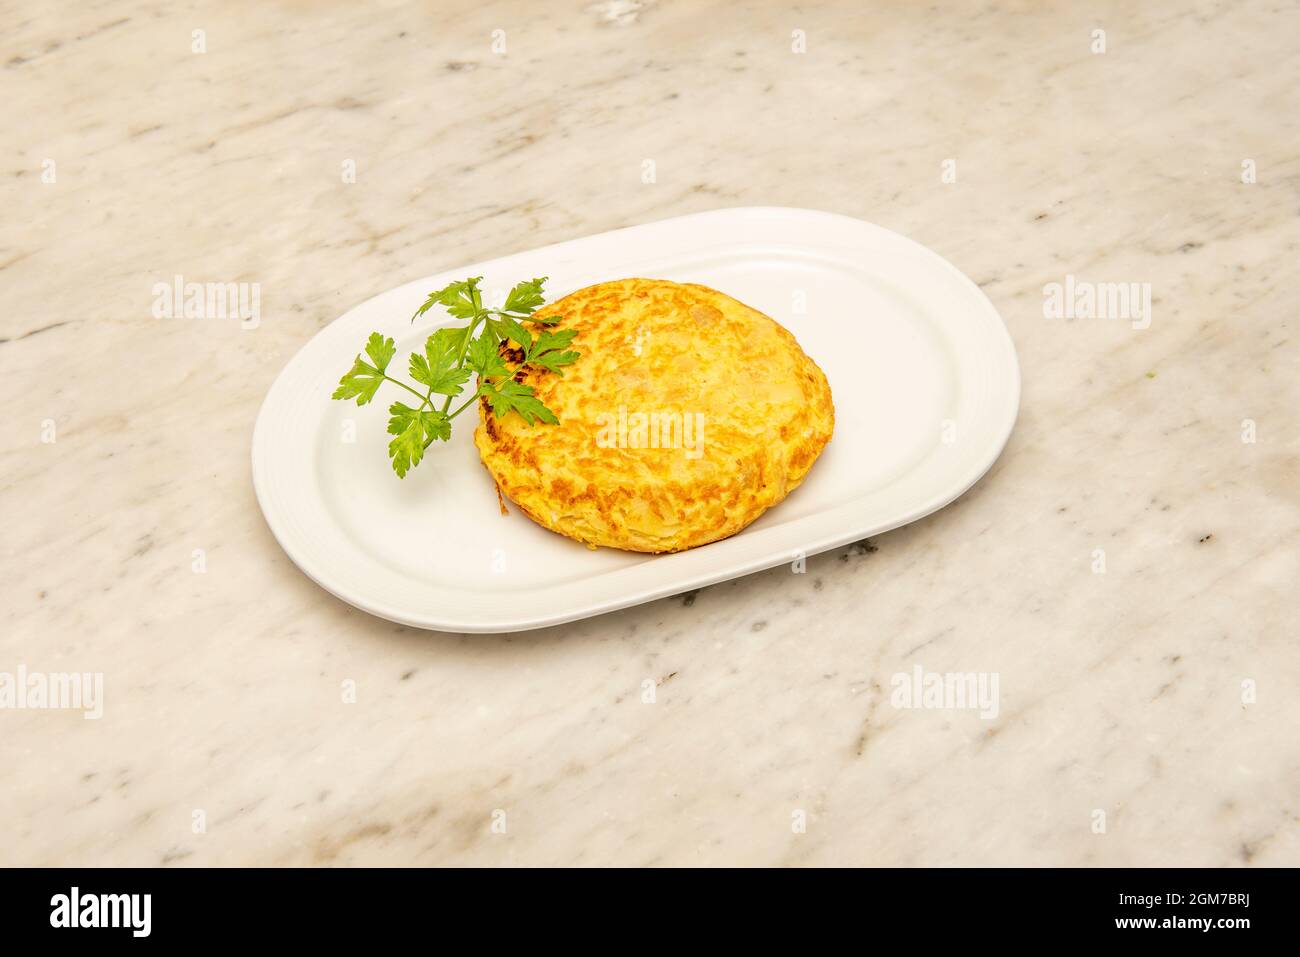 Spanish zucchini omelette garnished with parsley on a white marble table Stock Photo